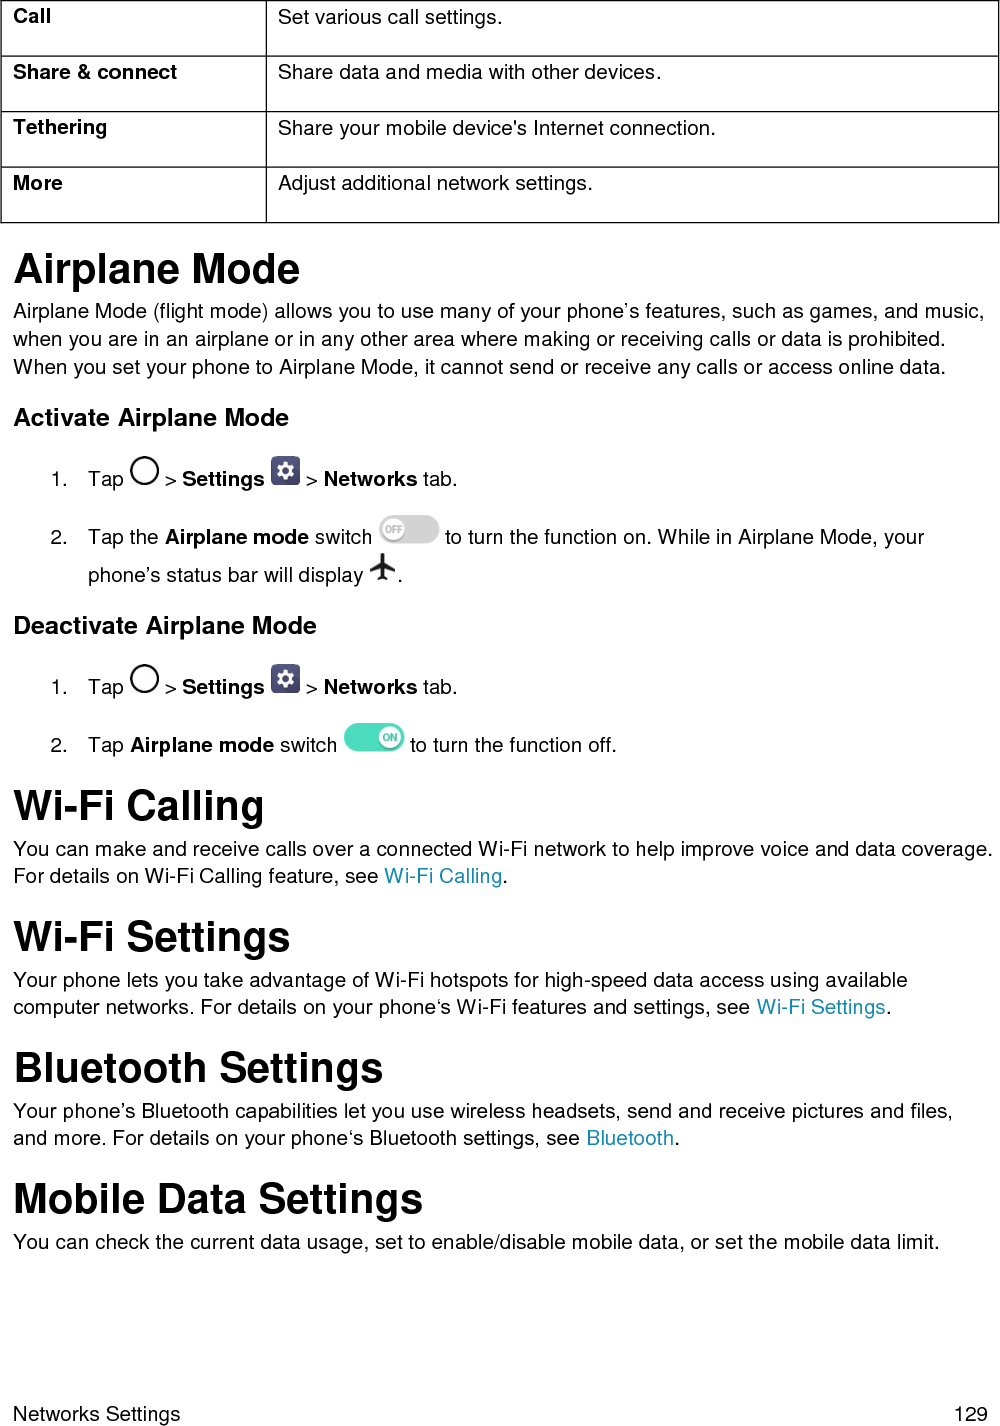  Networks Settings  129 Call Set various call settings. Share &amp; connect Share data and media with other devices. Tethering Share your mobile device&apos;s Internet connection. More Adjust additional network settings. Airplane Mode Airplane Mode (flight mode) allows you to use many of your phone’s features, such as games, and music, when you are in an airplane or in any other area where making or receiving calls or data is prohibited. When you set your phone to Airplane Mode, it cannot send or receive any calls or access online data. Activate Airplane Mode 1.  Tap   &gt; Settings   &gt; Networks tab. 2.  Tap the Airplane mode switch   to turn the function on. While in Airplane Mode, your phone’s status bar will display  . Deactivate Airplane Mode 1.  Tap   &gt; Settings   &gt; Networks tab. 2.  Tap Airplane mode switch   to turn the function off. Wi-Fi Calling You can make and receive calls over a connected Wi-Fi network to help improve voice and data coverage. For details on Wi-Fi Calling feature, see Wi-Fi Calling. Wi-Fi Settings Your phone lets you take advantage of Wi-Fi hotspots for high-speed data access using available computer networks. For details on your phone‘s Wi-Fi features and settings, see Wi-Fi Settings. Bluetooth Settings Your phone’s Bluetooth capabilities let you use wireless headsets, send and receive pictures and files, and more. For details on your phone‘s Bluetooth settings, see Bluetooth. Mobile Data Settings You can check the current data usage, set to enable/disable mobile data, or set the mobile data limit. 